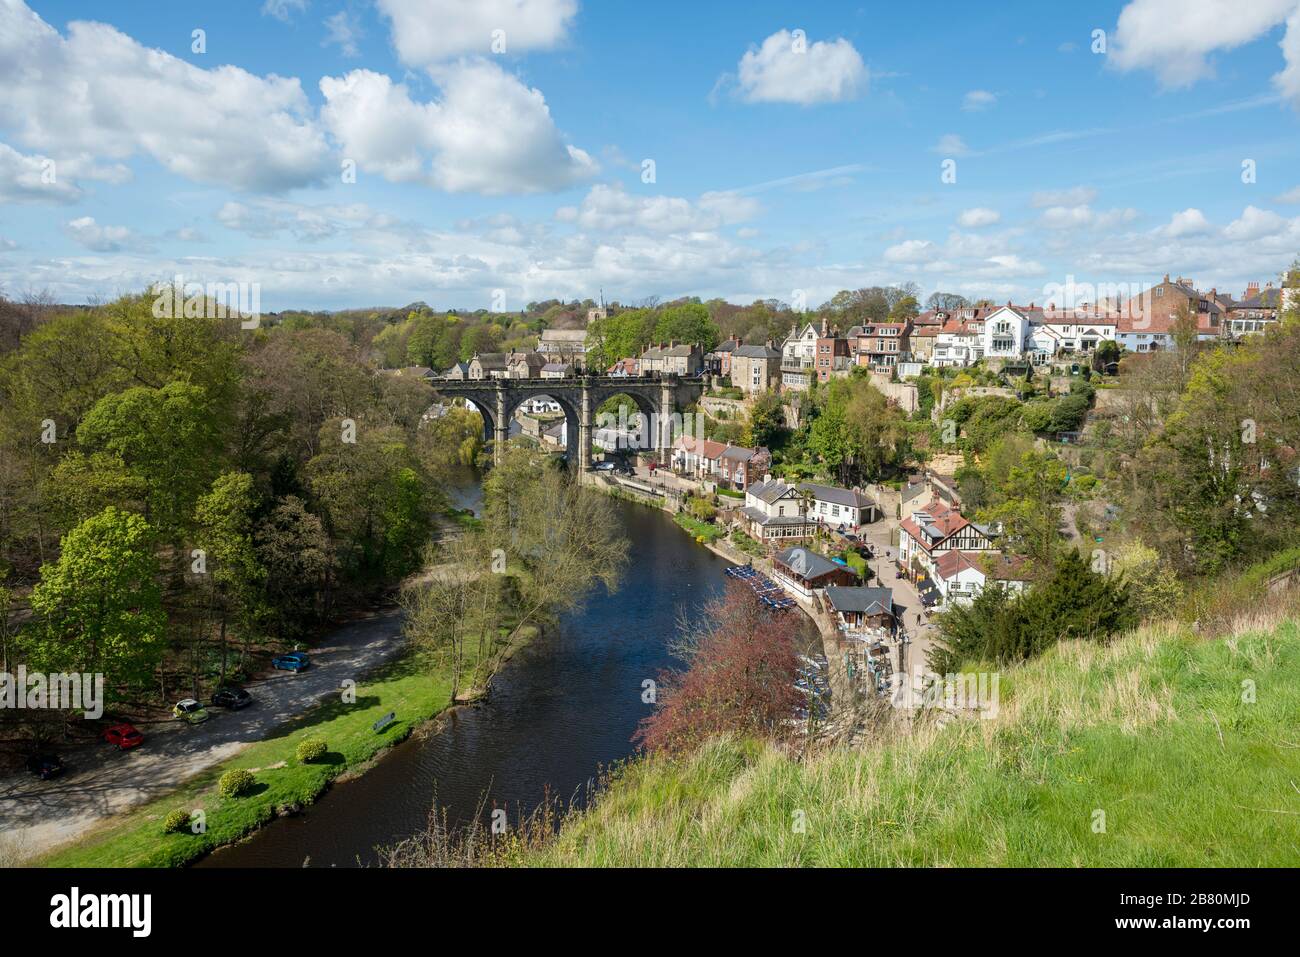 Sunny Summer view of the town of Knaresborough in North Yorkshire showing the railway Viaduct, Nidd Gorge and River Nidd Stock Photo